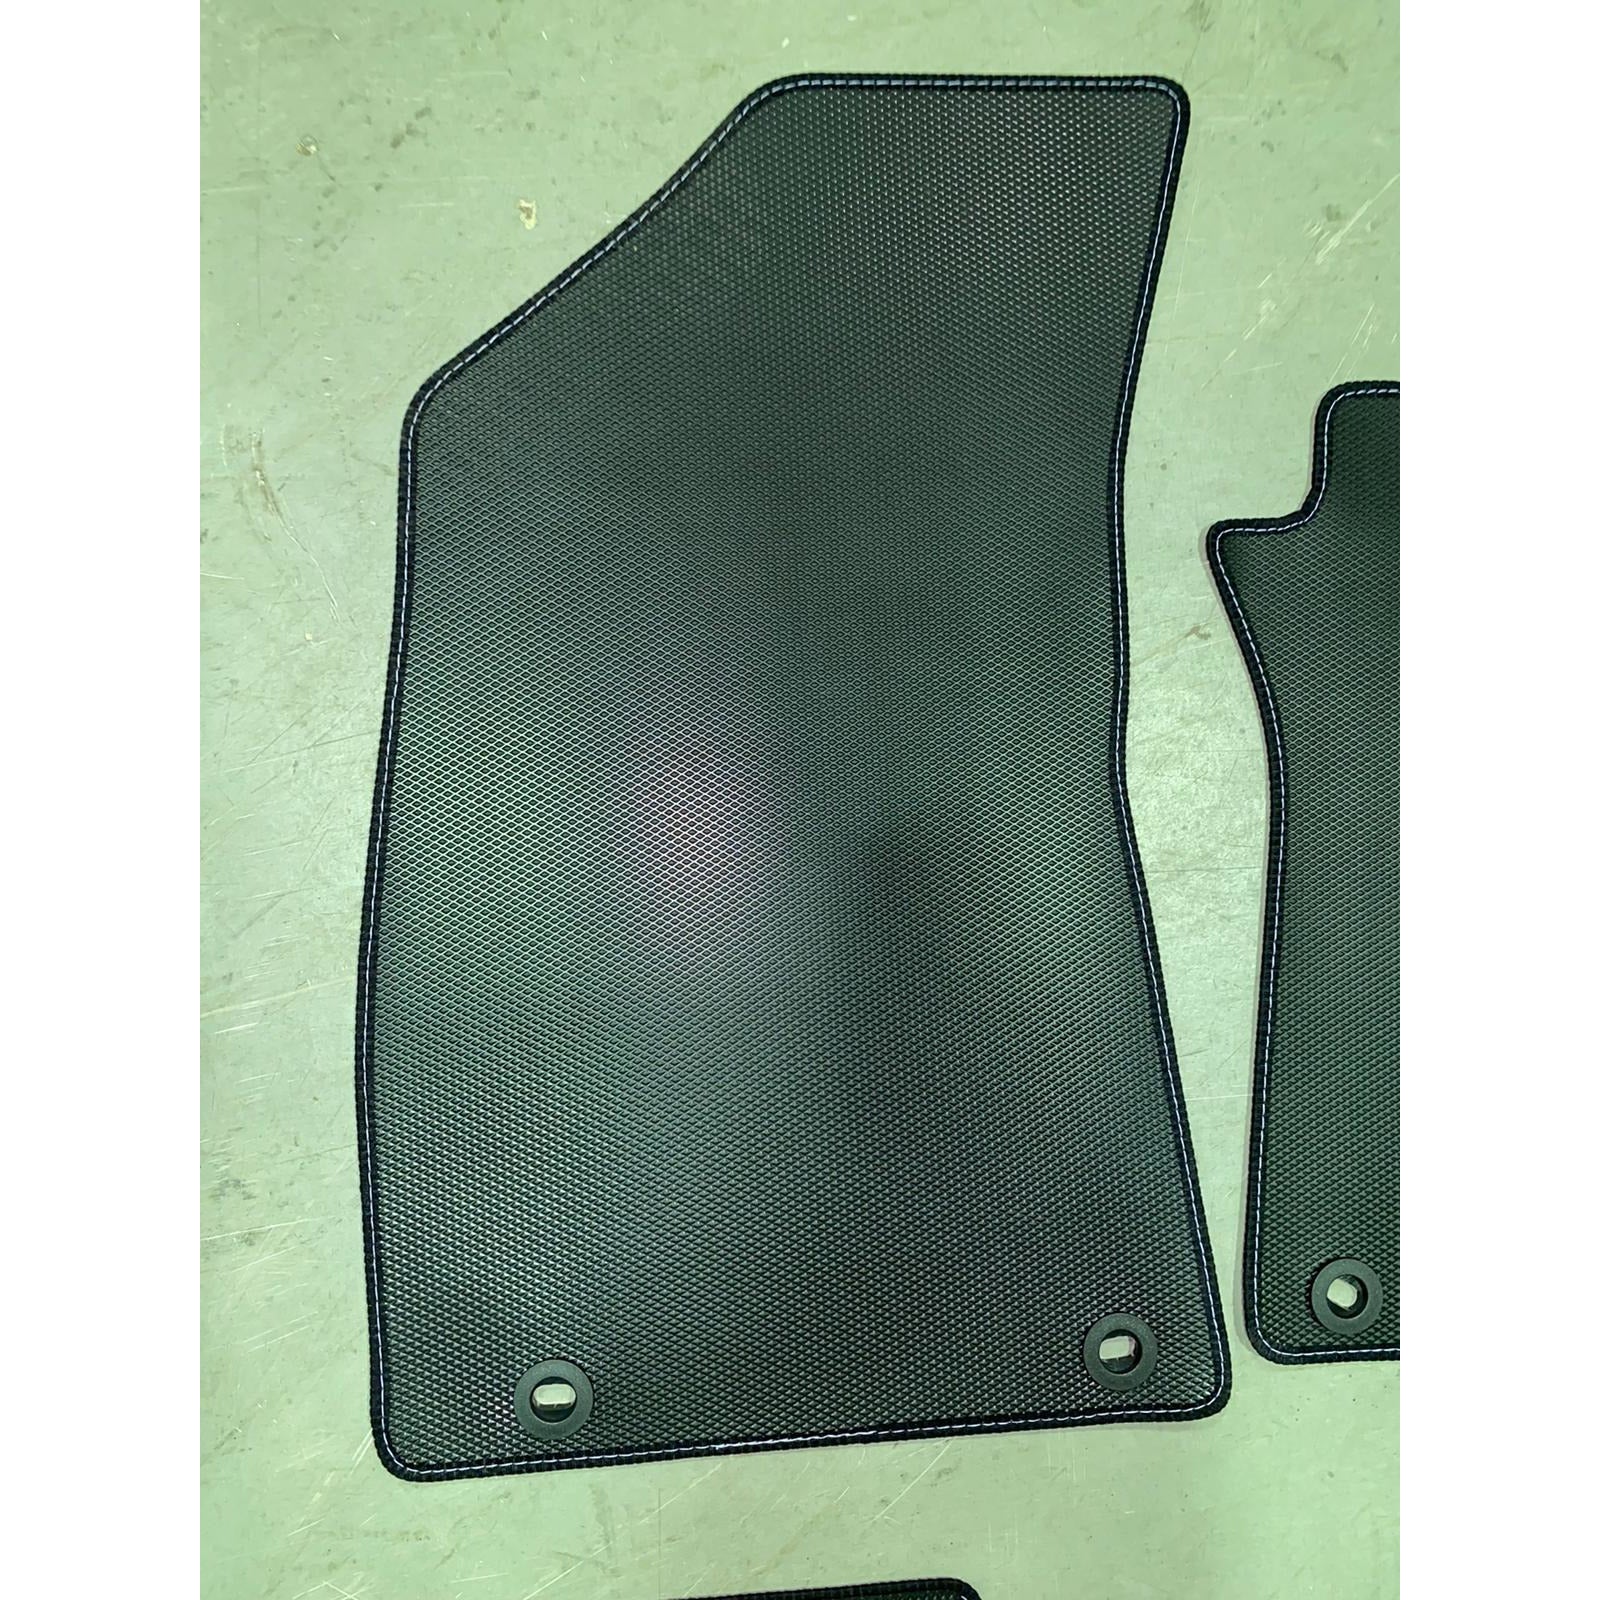 [Brand new] MG ZS 2021 Genuine Carpet Floor Mats - Black With Logo | ARG Parts & Accessories.